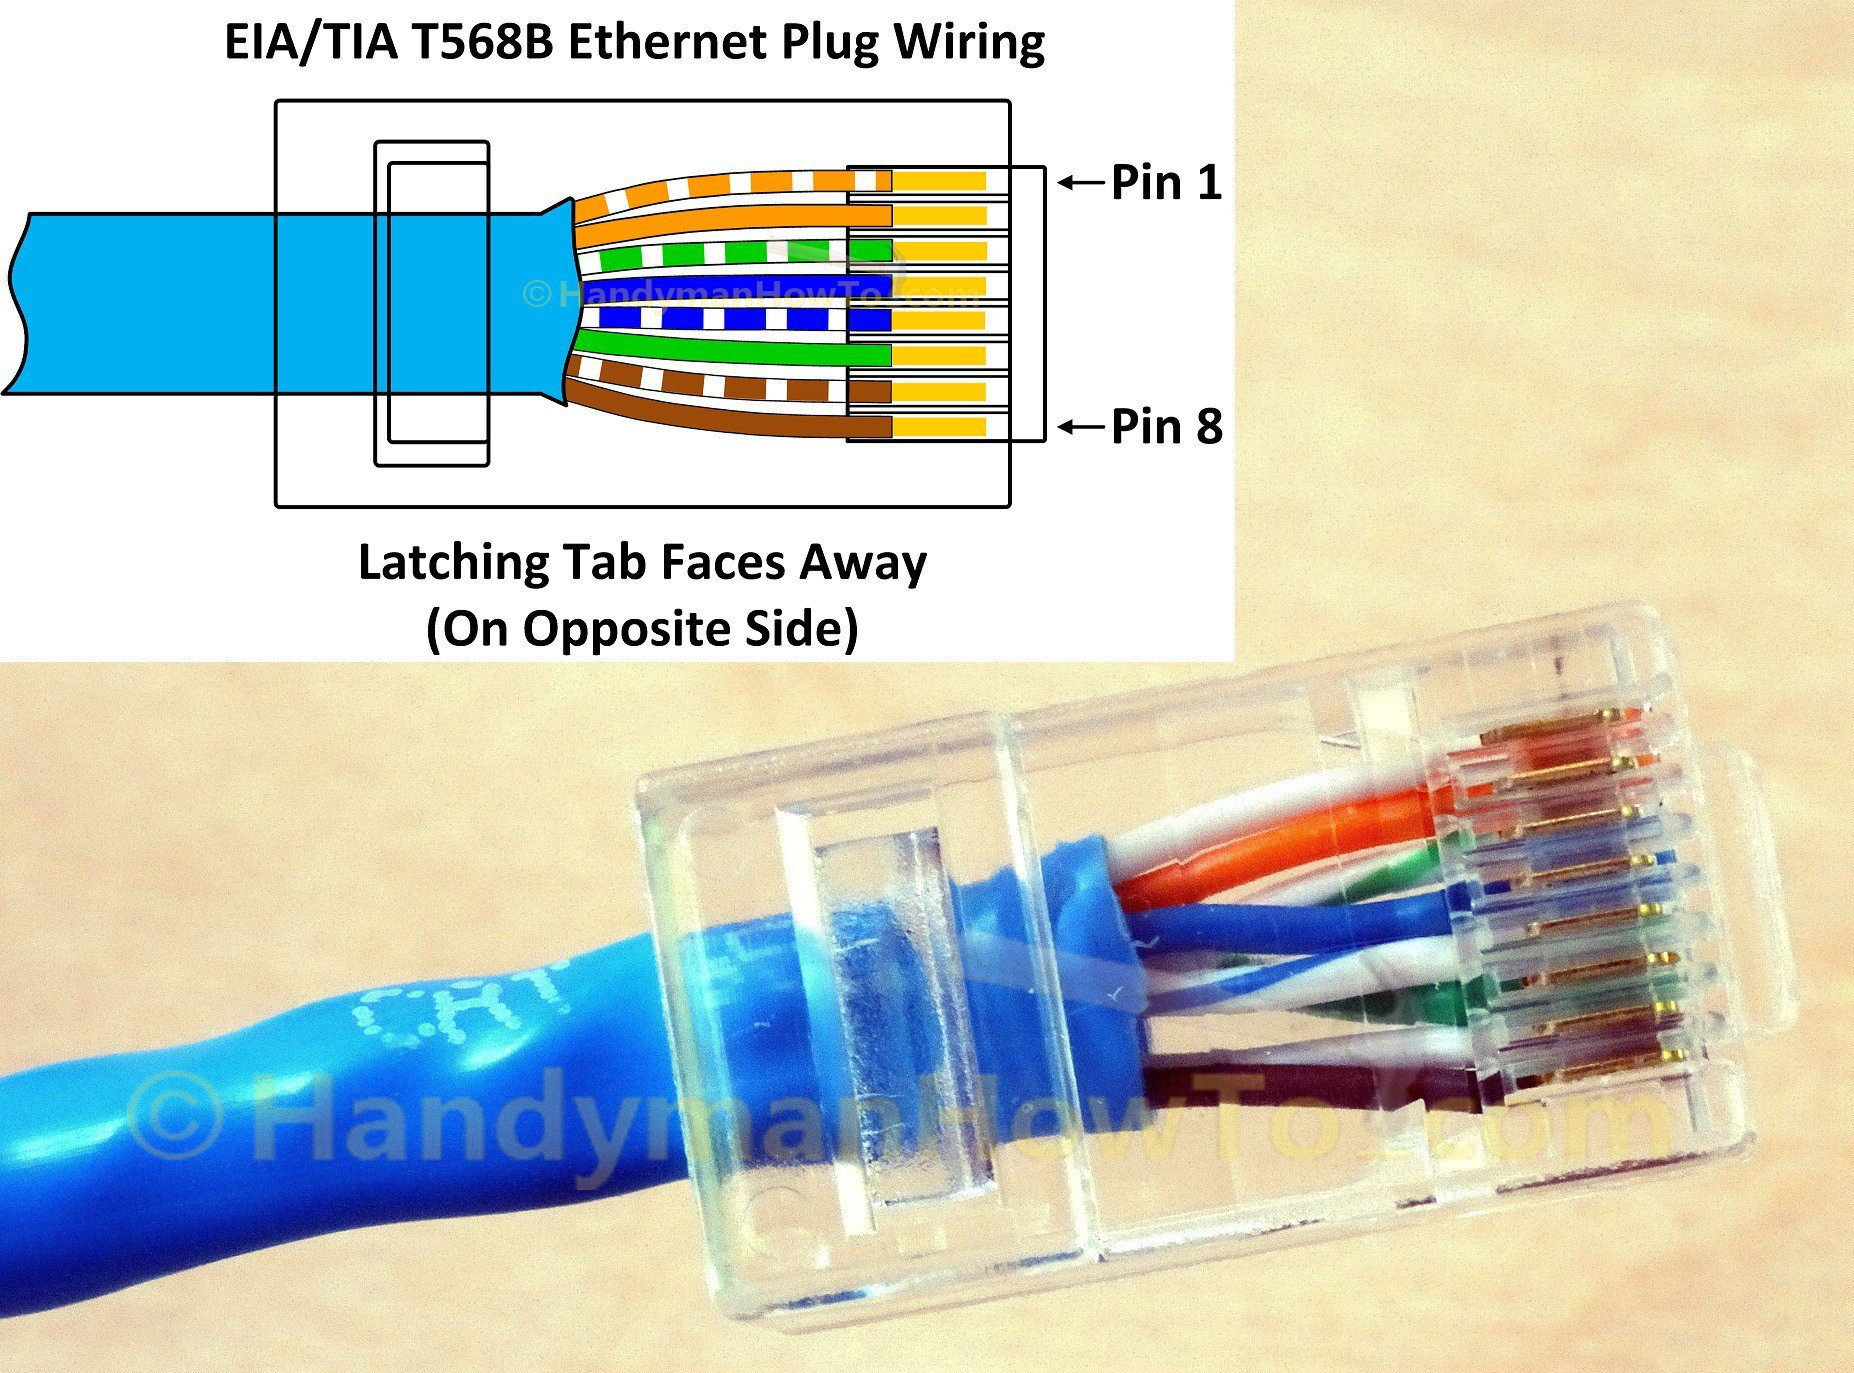 Rj45 Ethernet Cable And Plug Wiring - Today Wiring Diagram - Rj45 Wiring Diagram